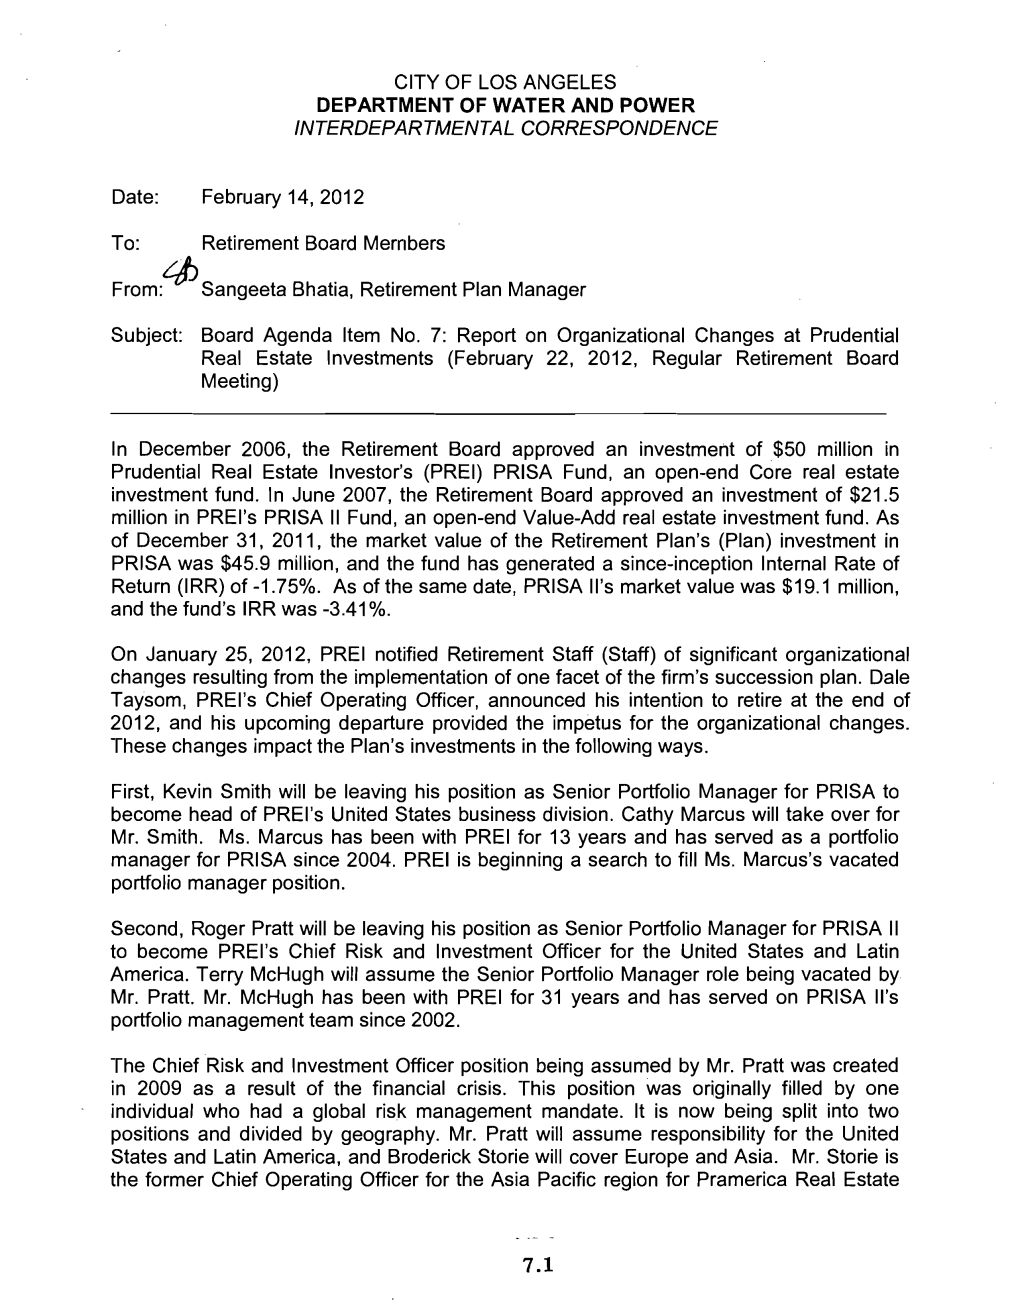 Report on Organizational Changes at Prudential Real Estate Investments (February 22, 2012, Regular Retirement Board Meeting)